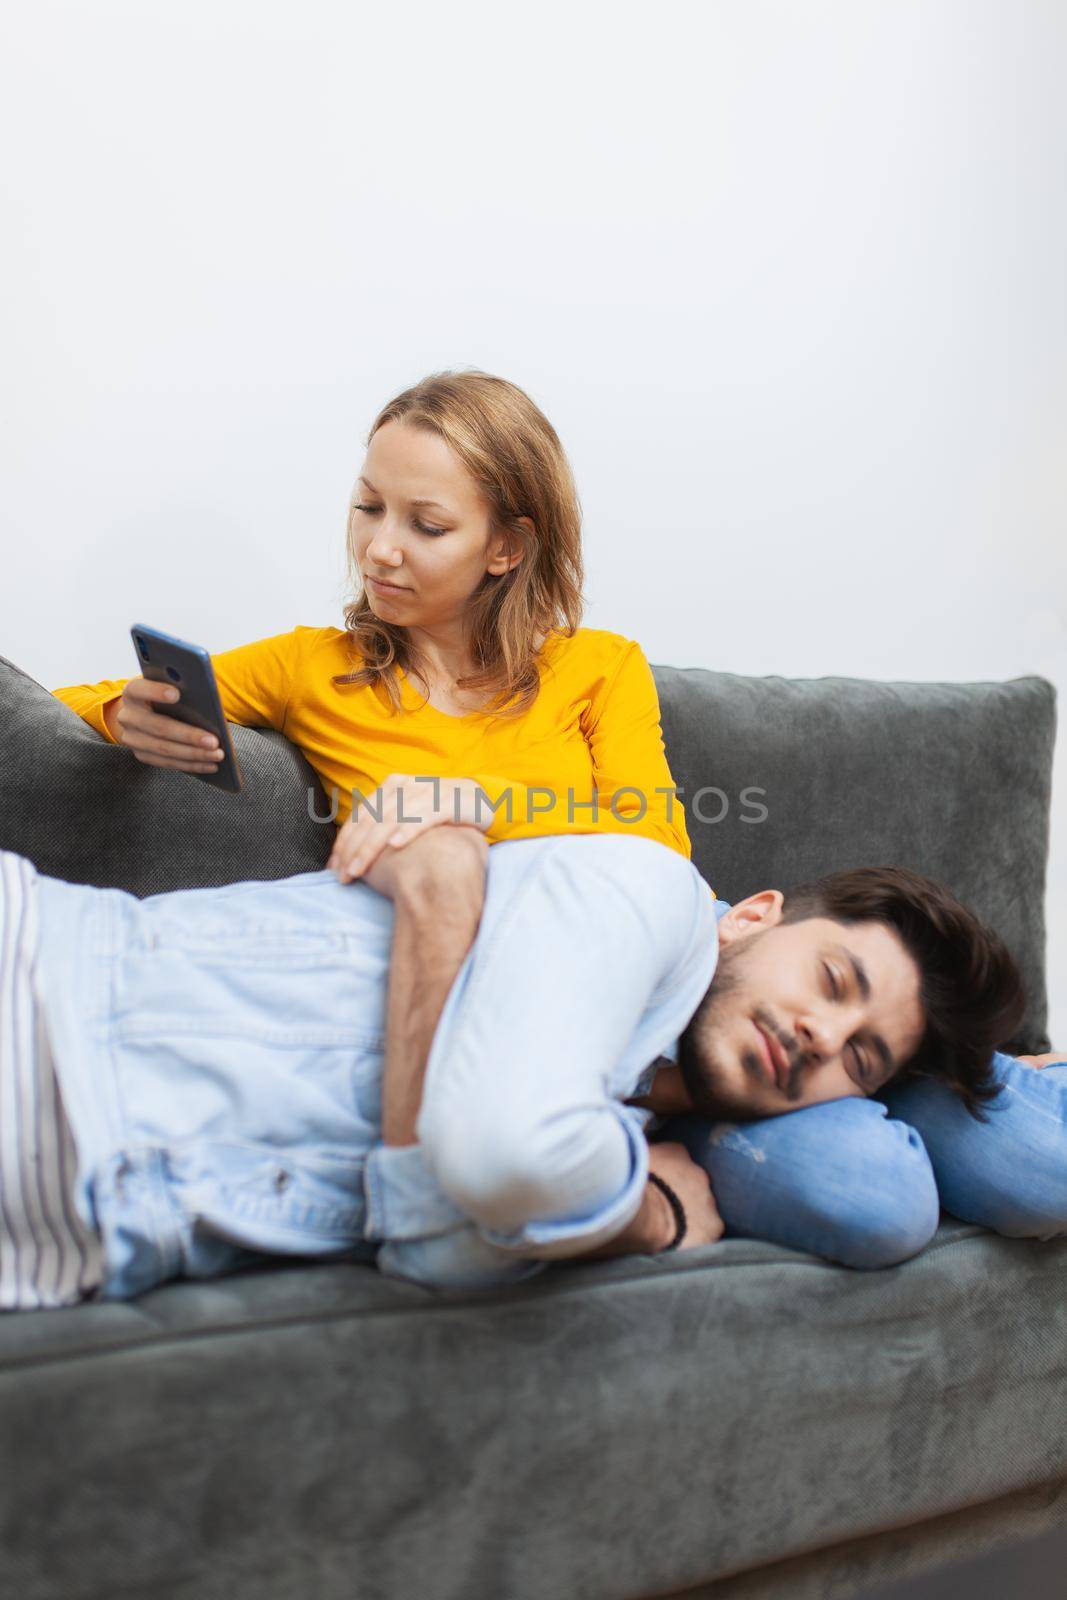 boy naps on girlfriend's lap while she looks at smart phone